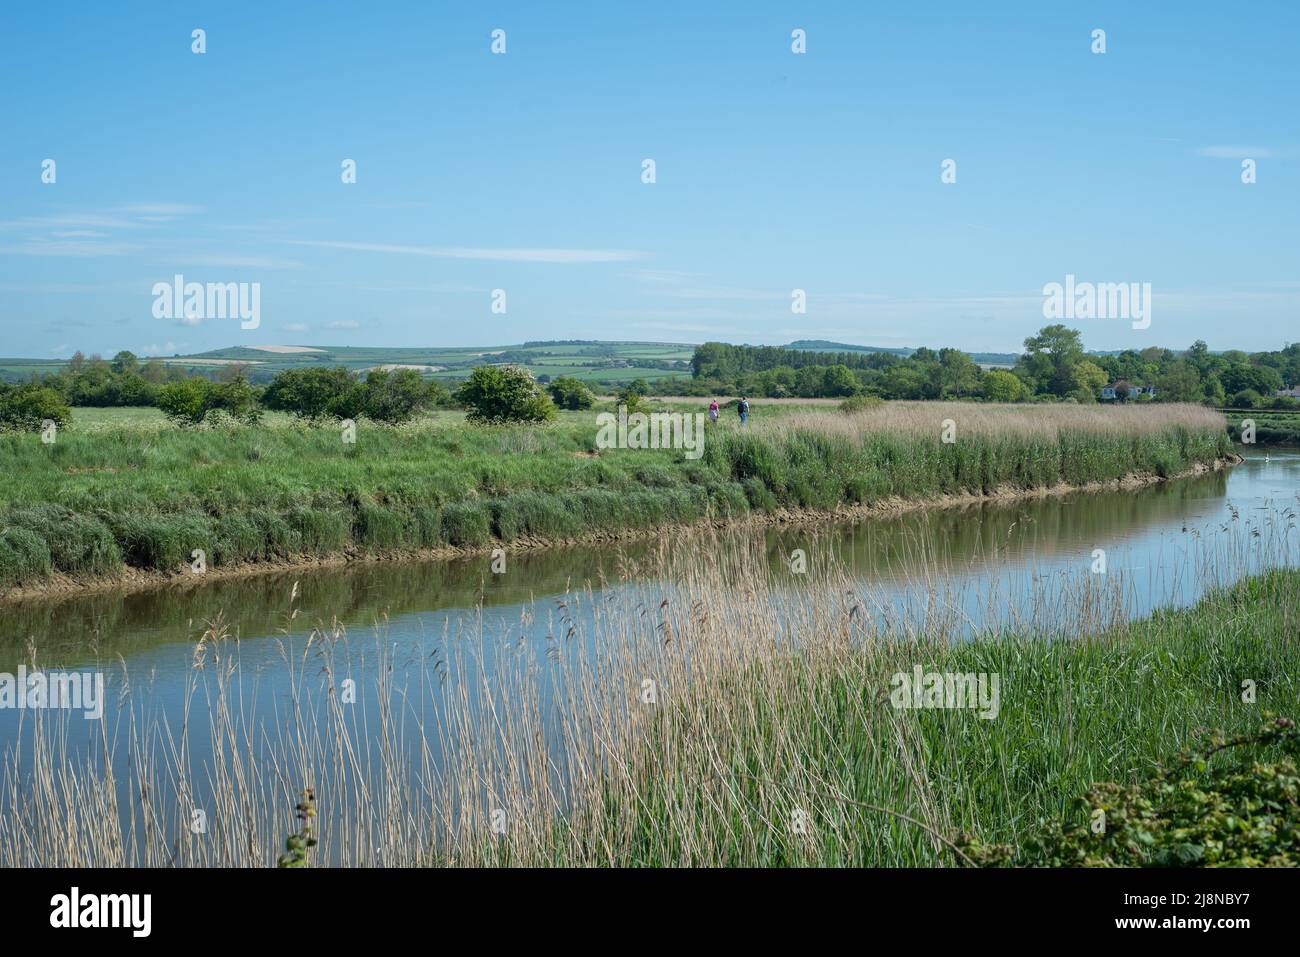 A couple of people walk along the river Arun in West Sussex, England. Picturesque scenery to walk or hike through in the fresh air. Stock Photo